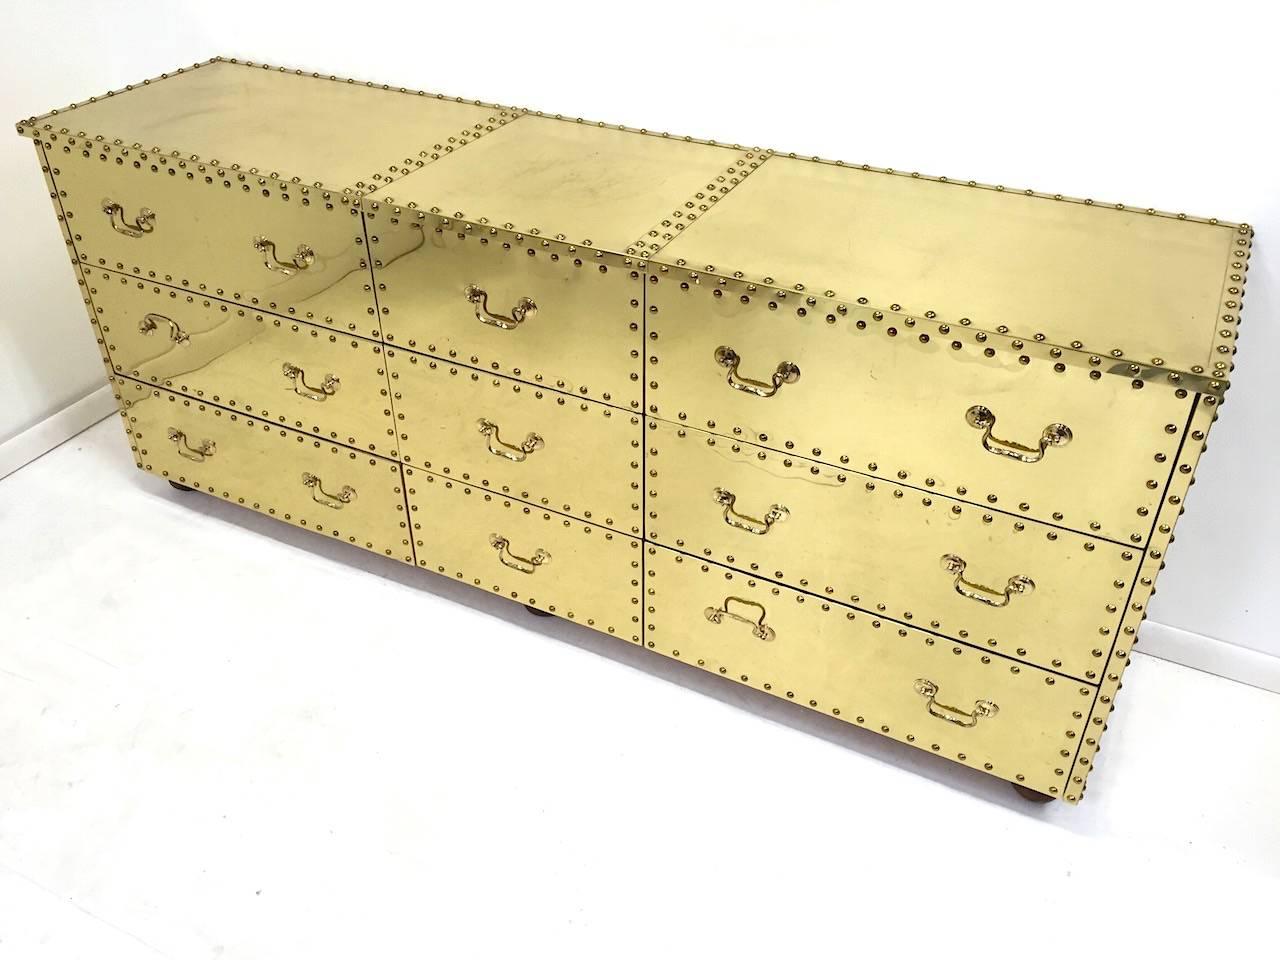 Rare Sarreid Ltd. nine Drawer Brass Clad Chest of Drawers. Good original condition with some age appropriate scratches on the top surface as pictured.  